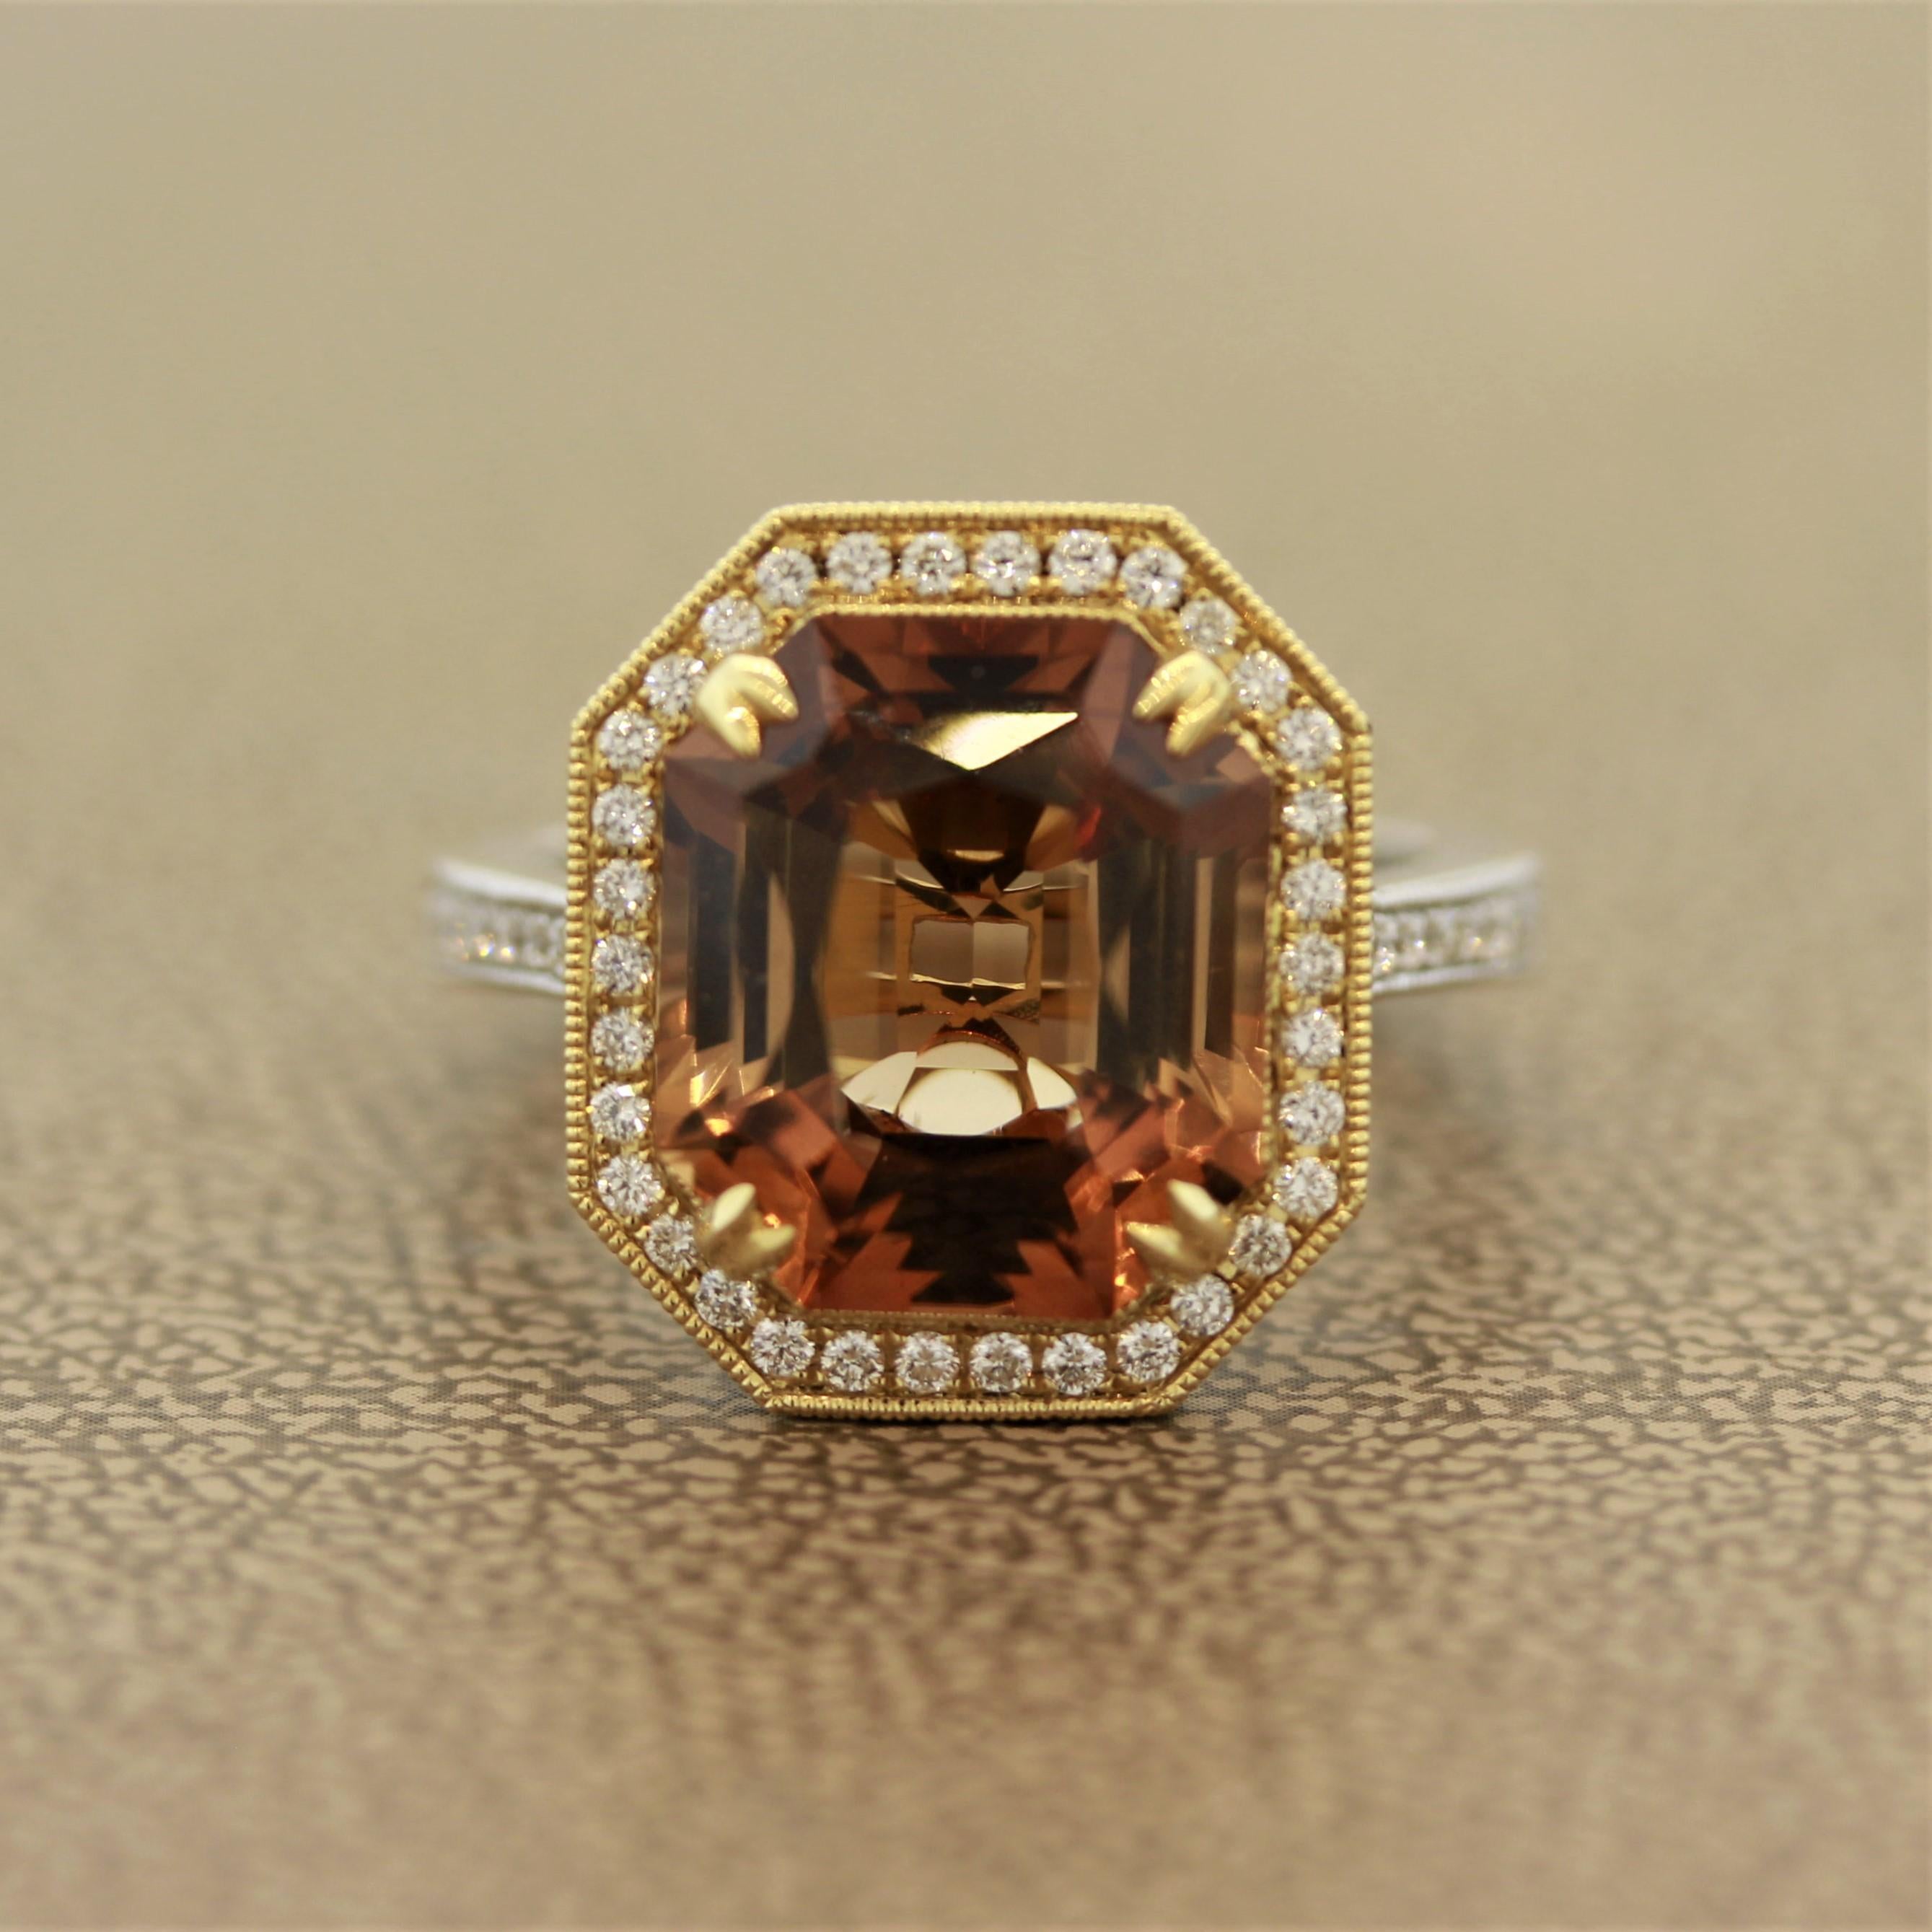 A spectacular imperial topaz weighing 8.60 carats. It is certified by the GIA and has a yellowish-orange color. It is accompanied by 0.60 carats or round brilliant cut diamonds set inn18k white and yellow gold. Imperial is the trade term for topaz